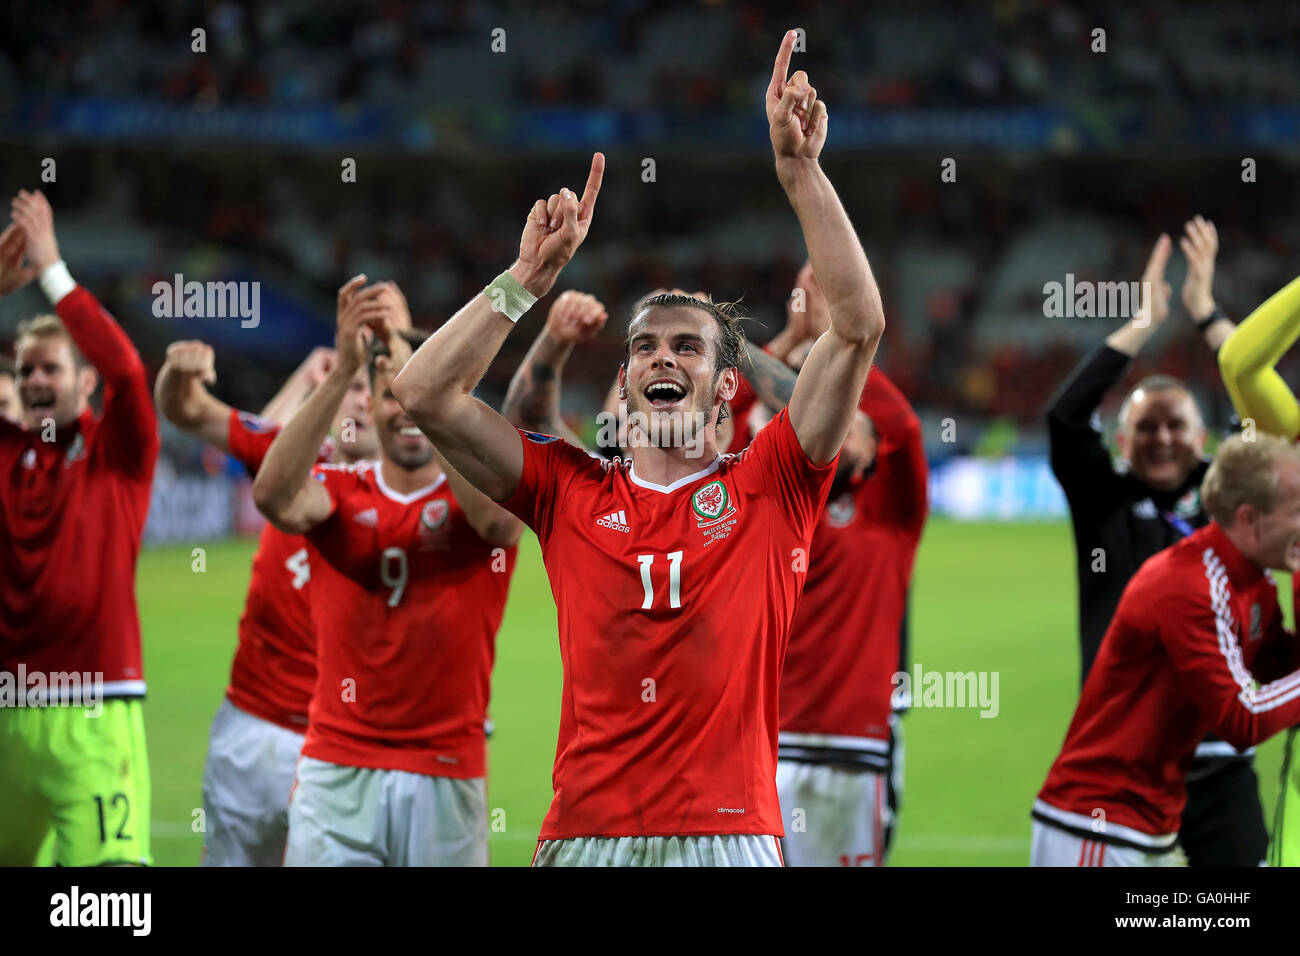 Wales' Gareth Bale celebrates victory in the UEFA Euro 2016, quarter final match at the Stade Pierre Mauroy, Lille. Stock Photo